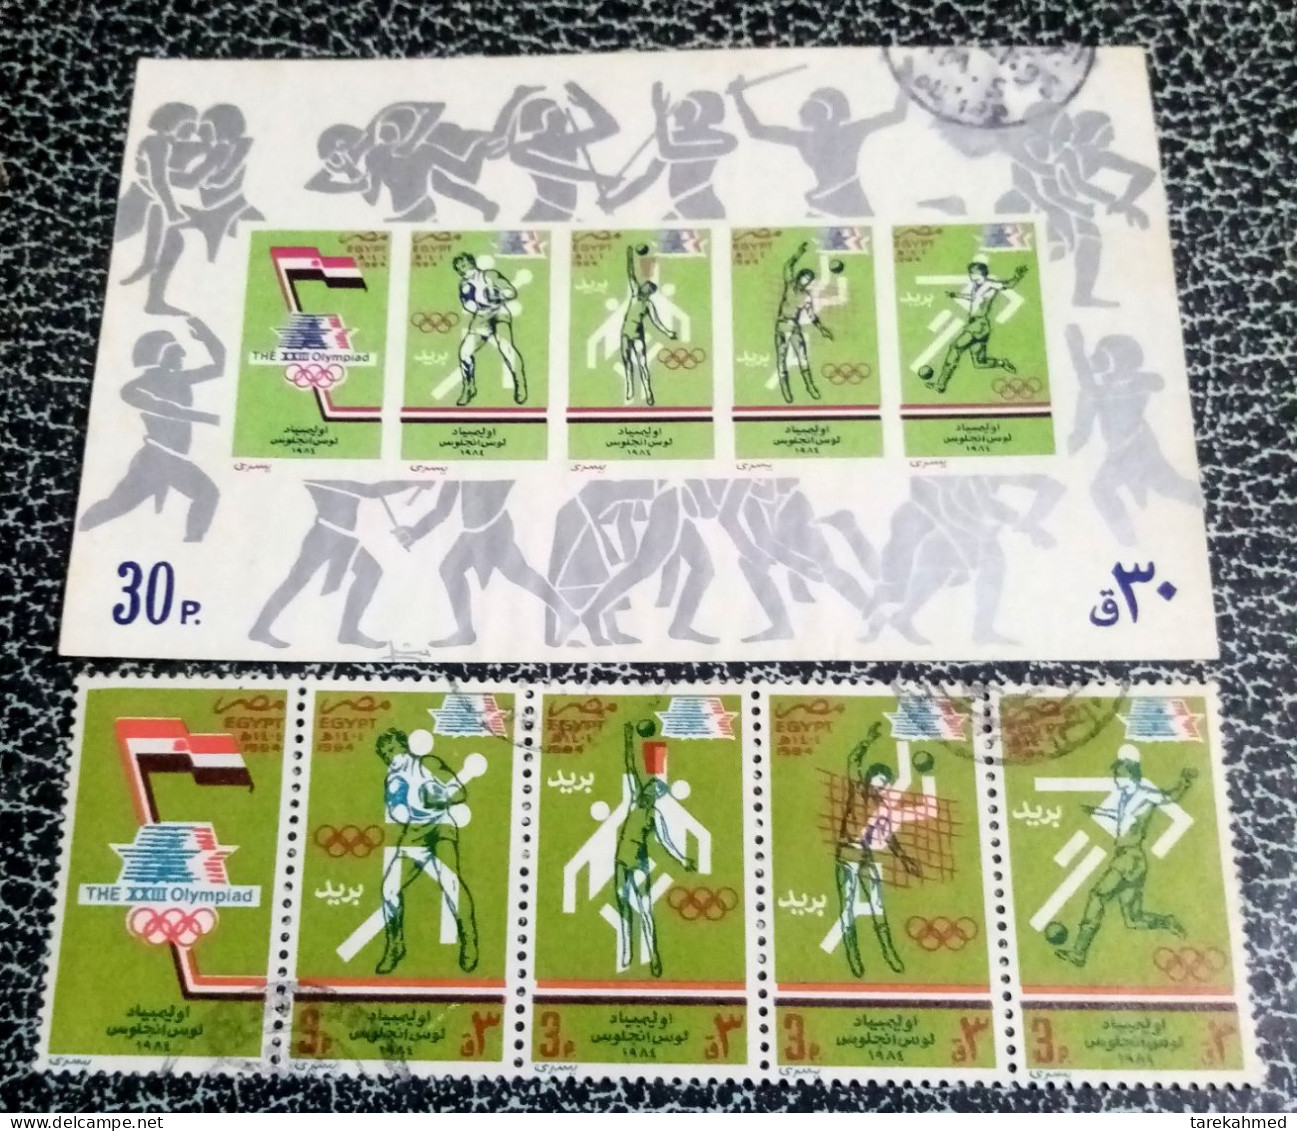 EGYPT -Complete Set Of The Olympic Games 1984-Los Angeles Olympics With The Souvenir Sheet, VF - Usati